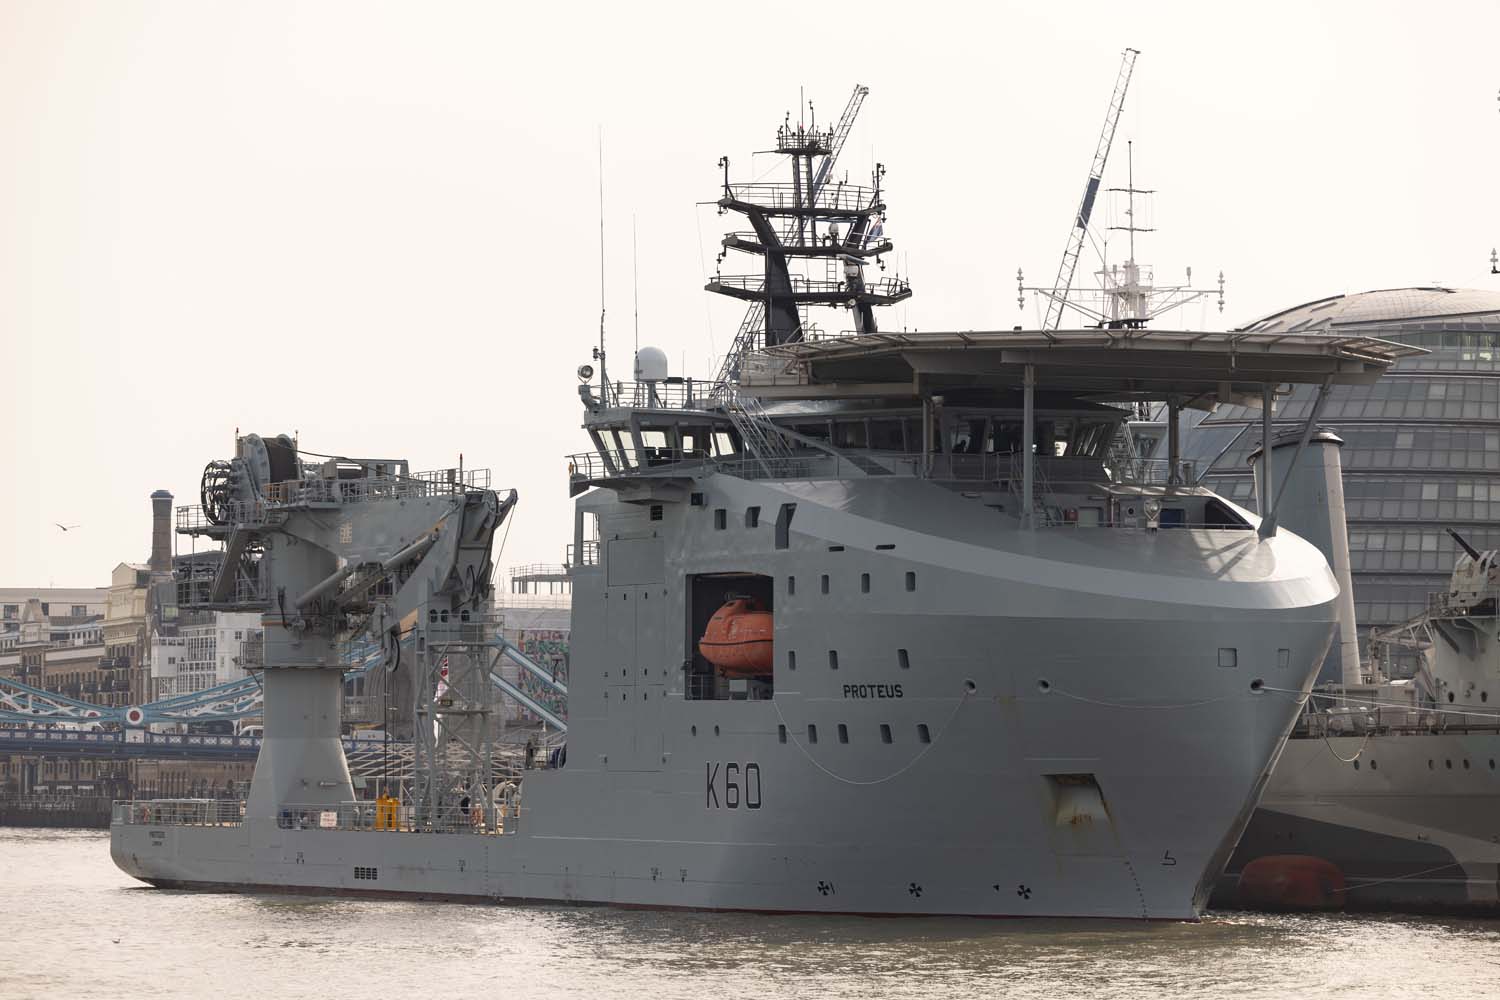 RFA Proteus is seen docked in London. HMS Belfast, an old UK wartime ship, is seen in the background beside Proteus.